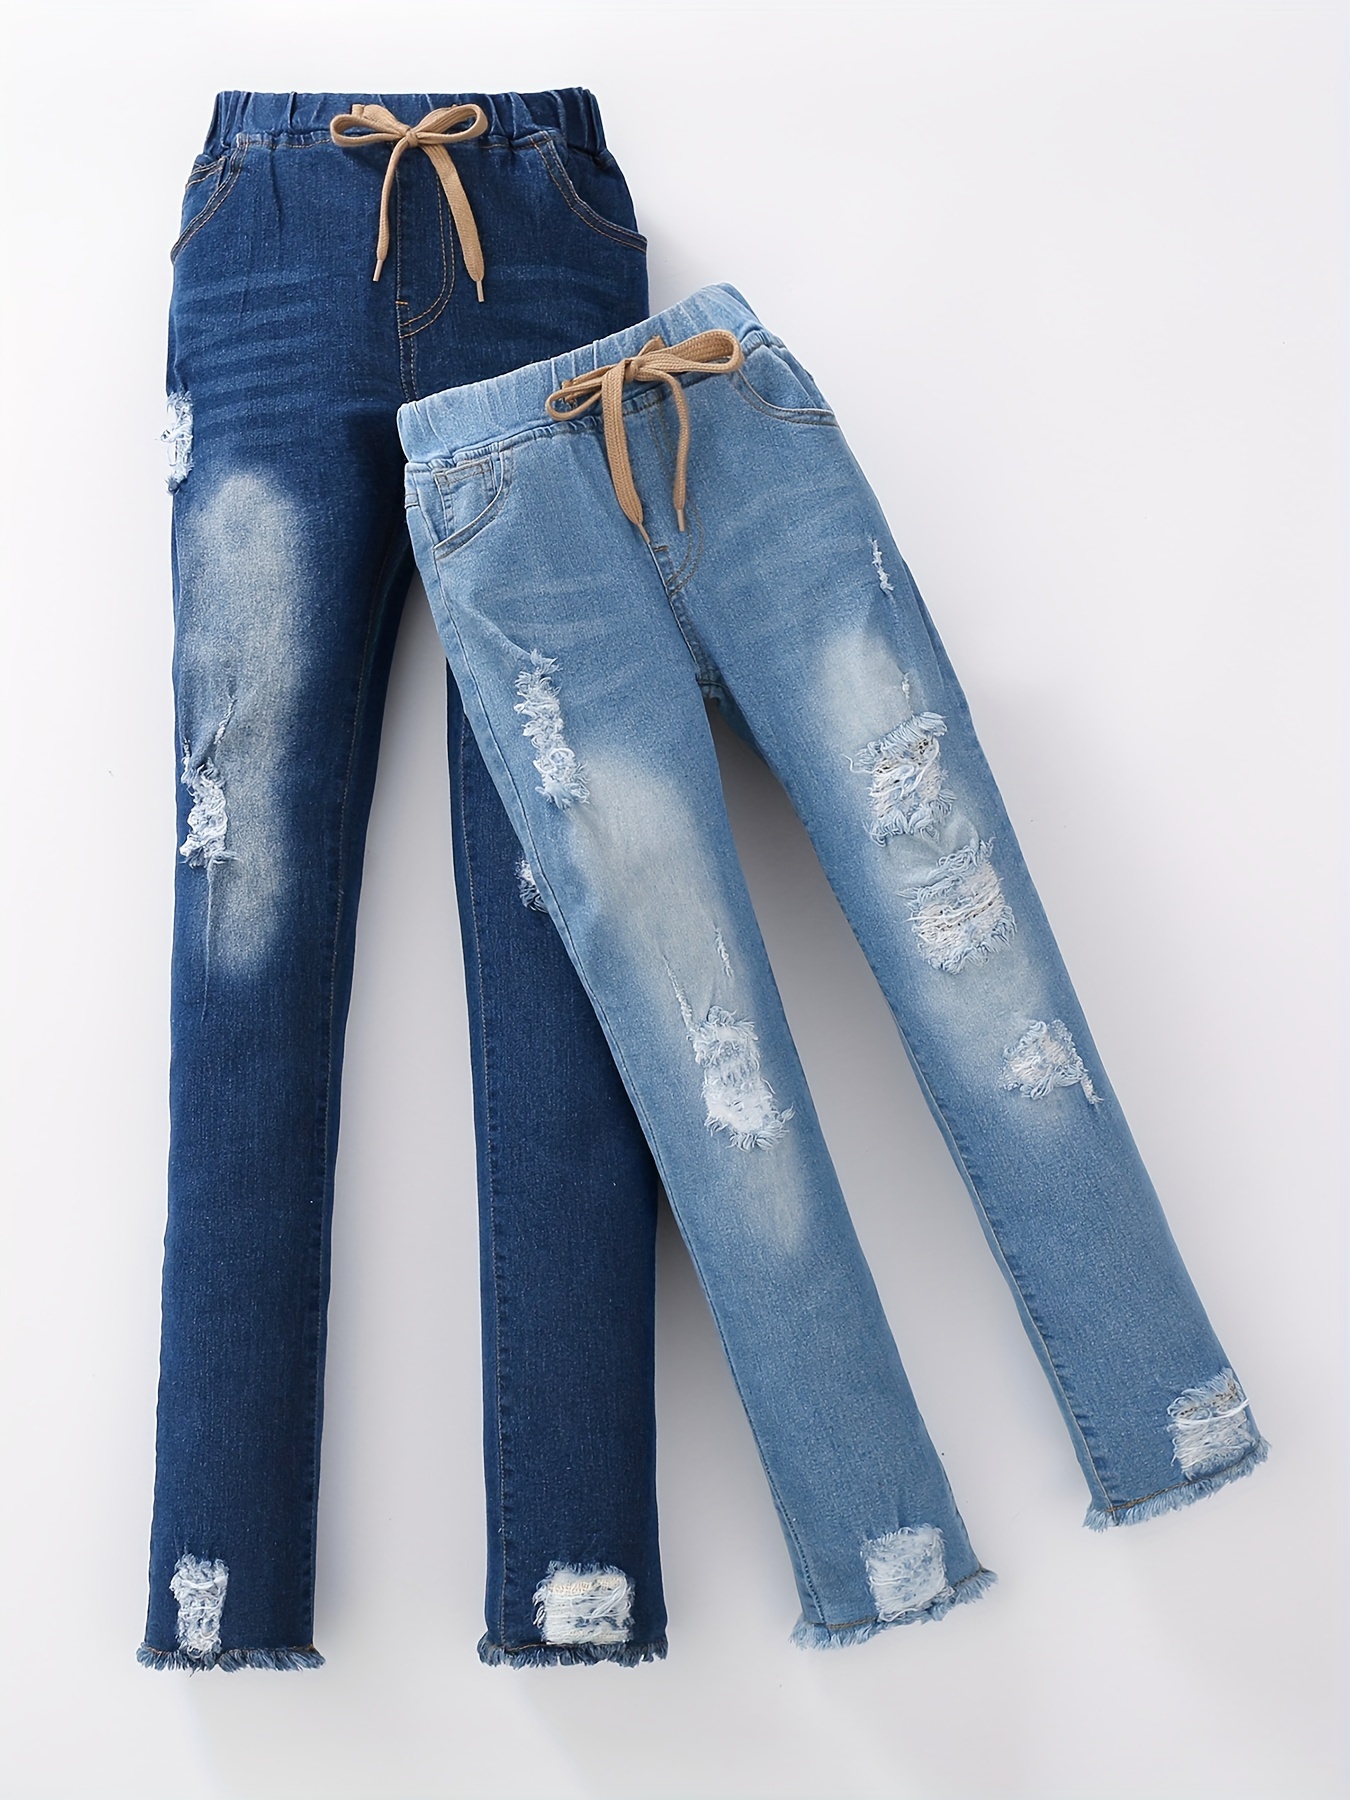 Cute Teen Girl Teen Girls's Size Distressed Ripped Skinny Jeans